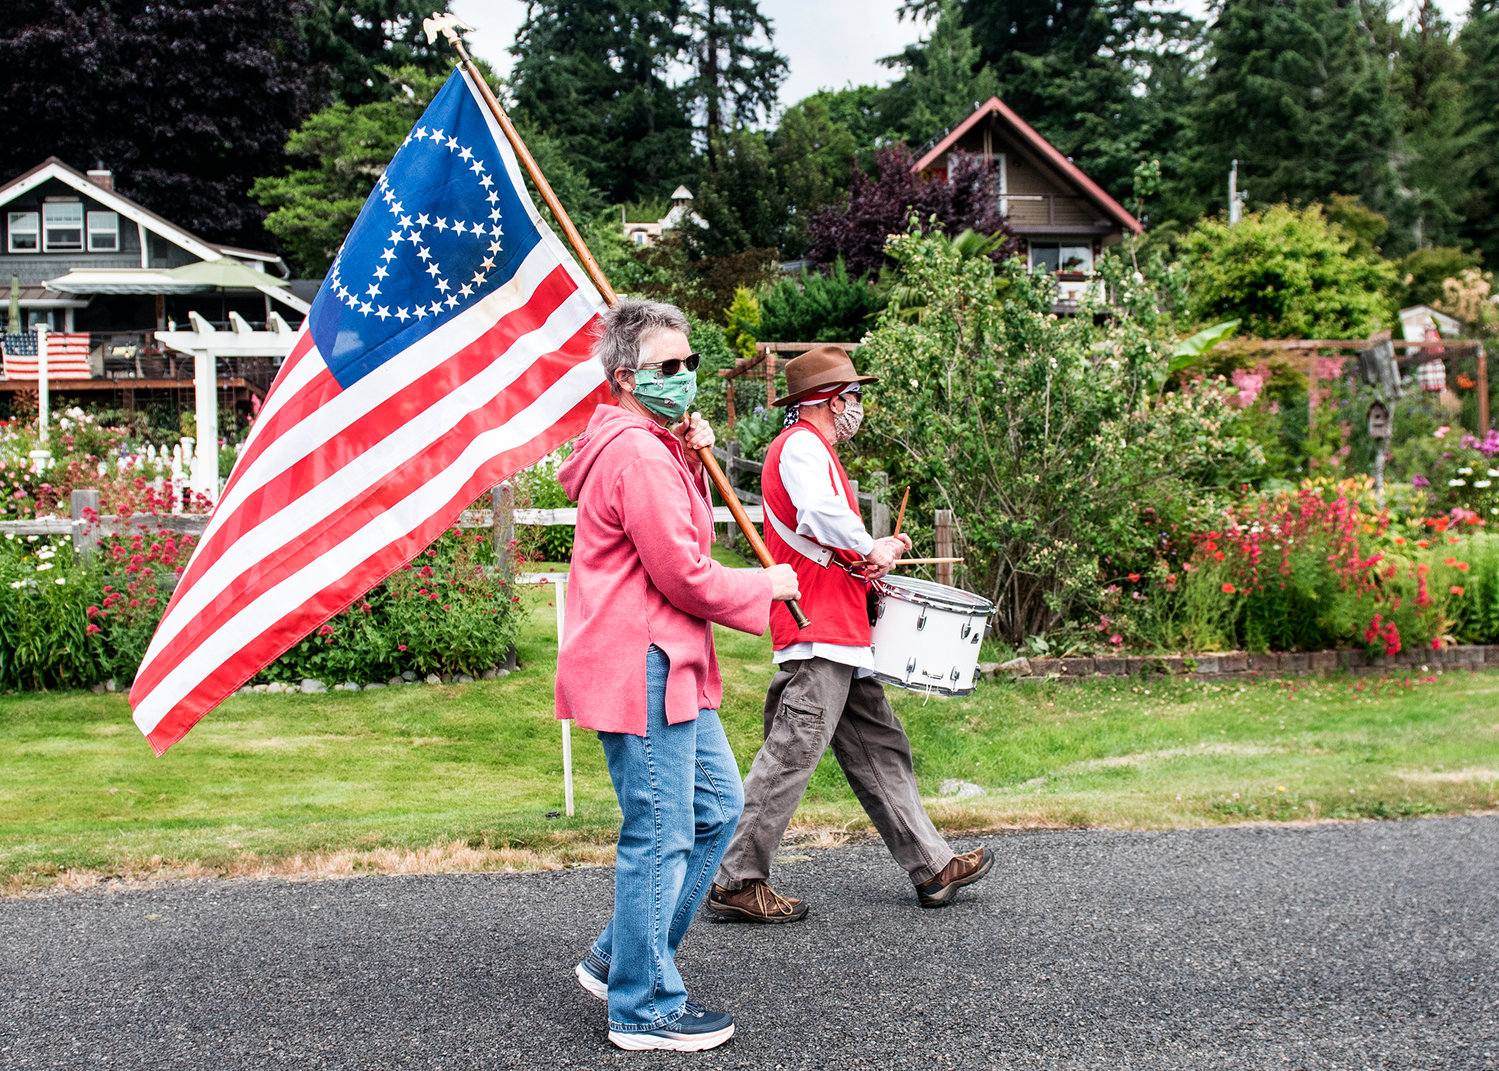 A scaled-back Fourth of July parade in Home, where roughly a third of the participants wore masks.